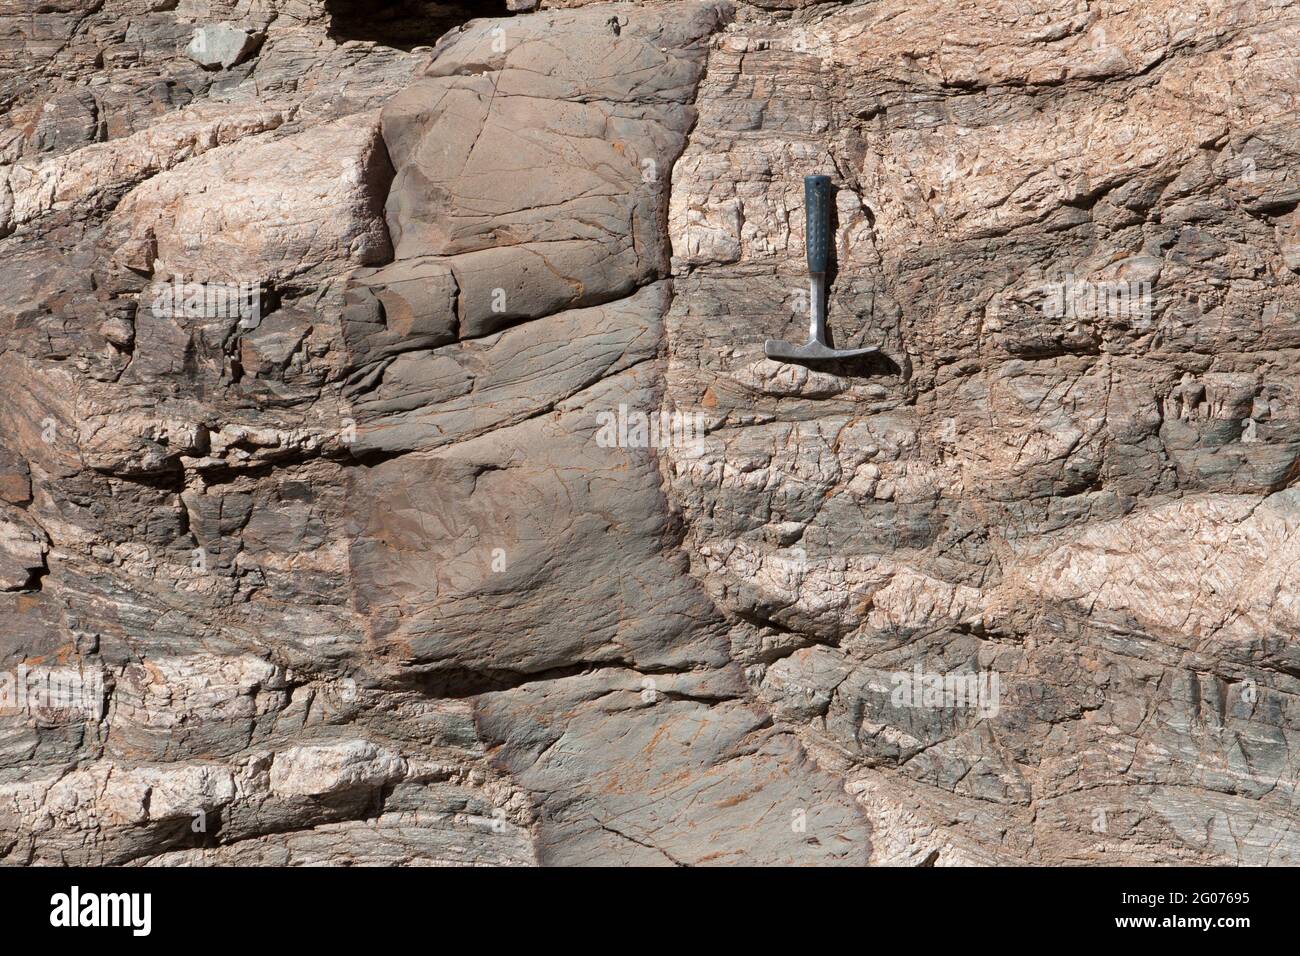 Basaltic dike with chilled margins intruding metamorphic rock (gneiss), SE California. Rock hammer for scale. Stock Photo